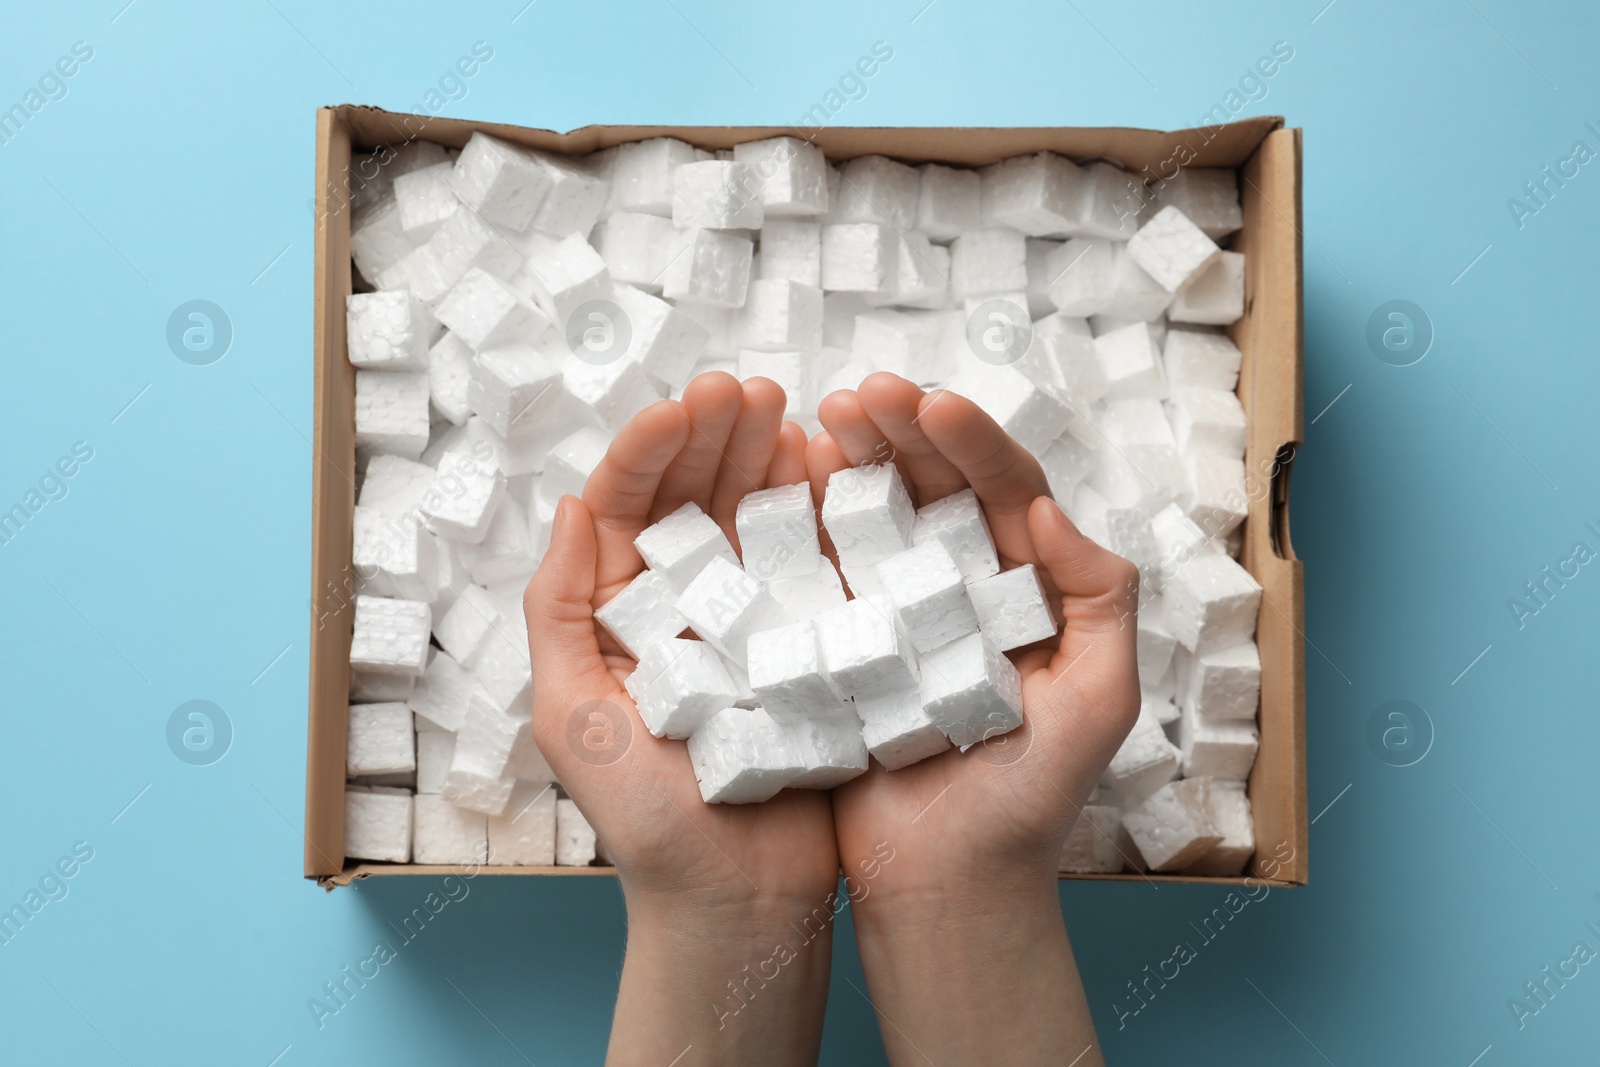 Photo of Woman holding heap of styrofoam cubes over box on light blue background, top view